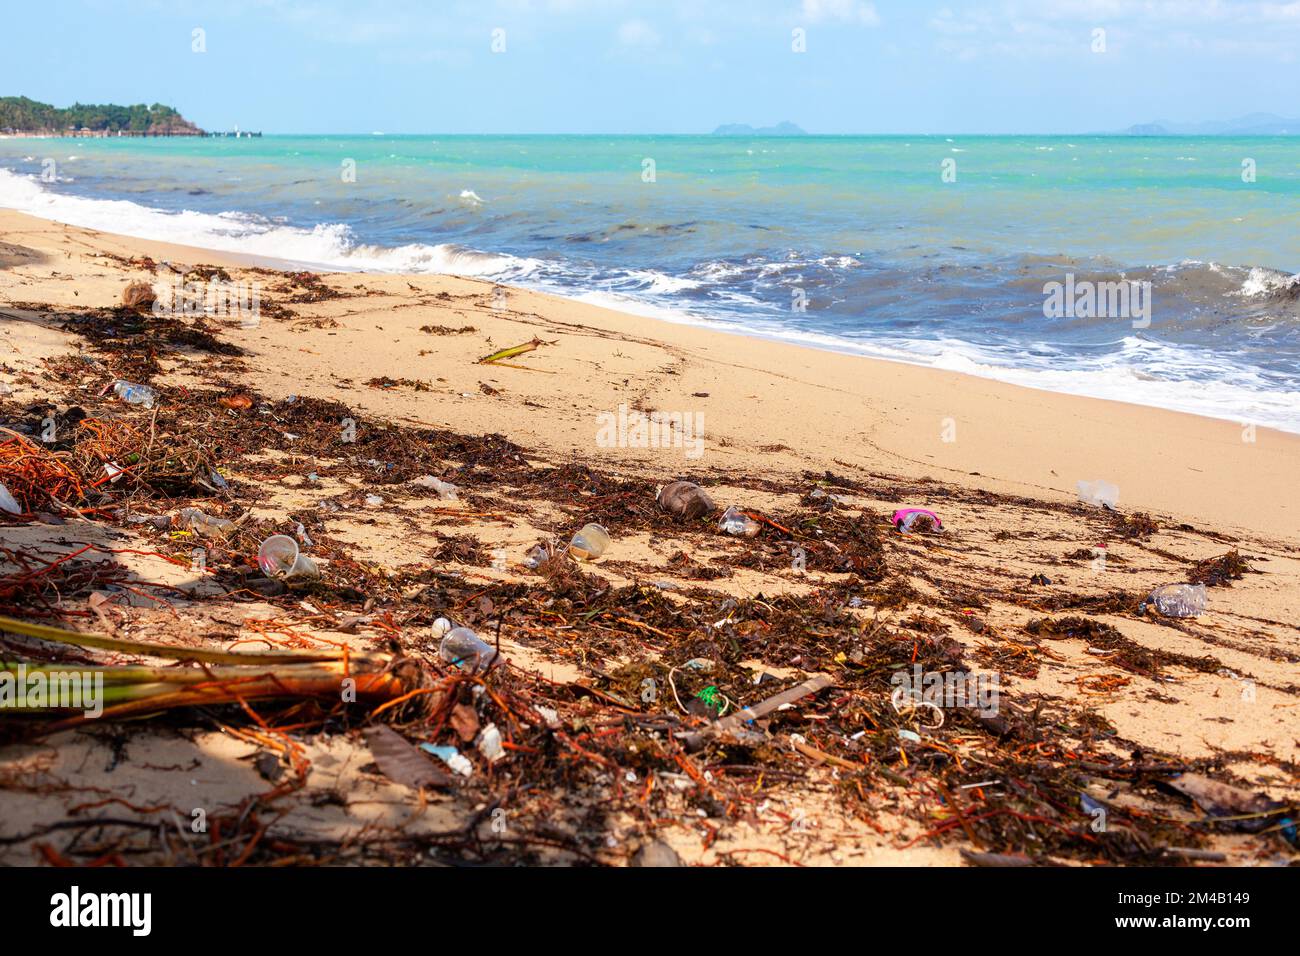 Garbage sea sand beach, unsorted rubbish, plastic bag, glass bottle, metal can, trash, refuse pile, litter, dirty ocean water, environmental pollution Stock Photo